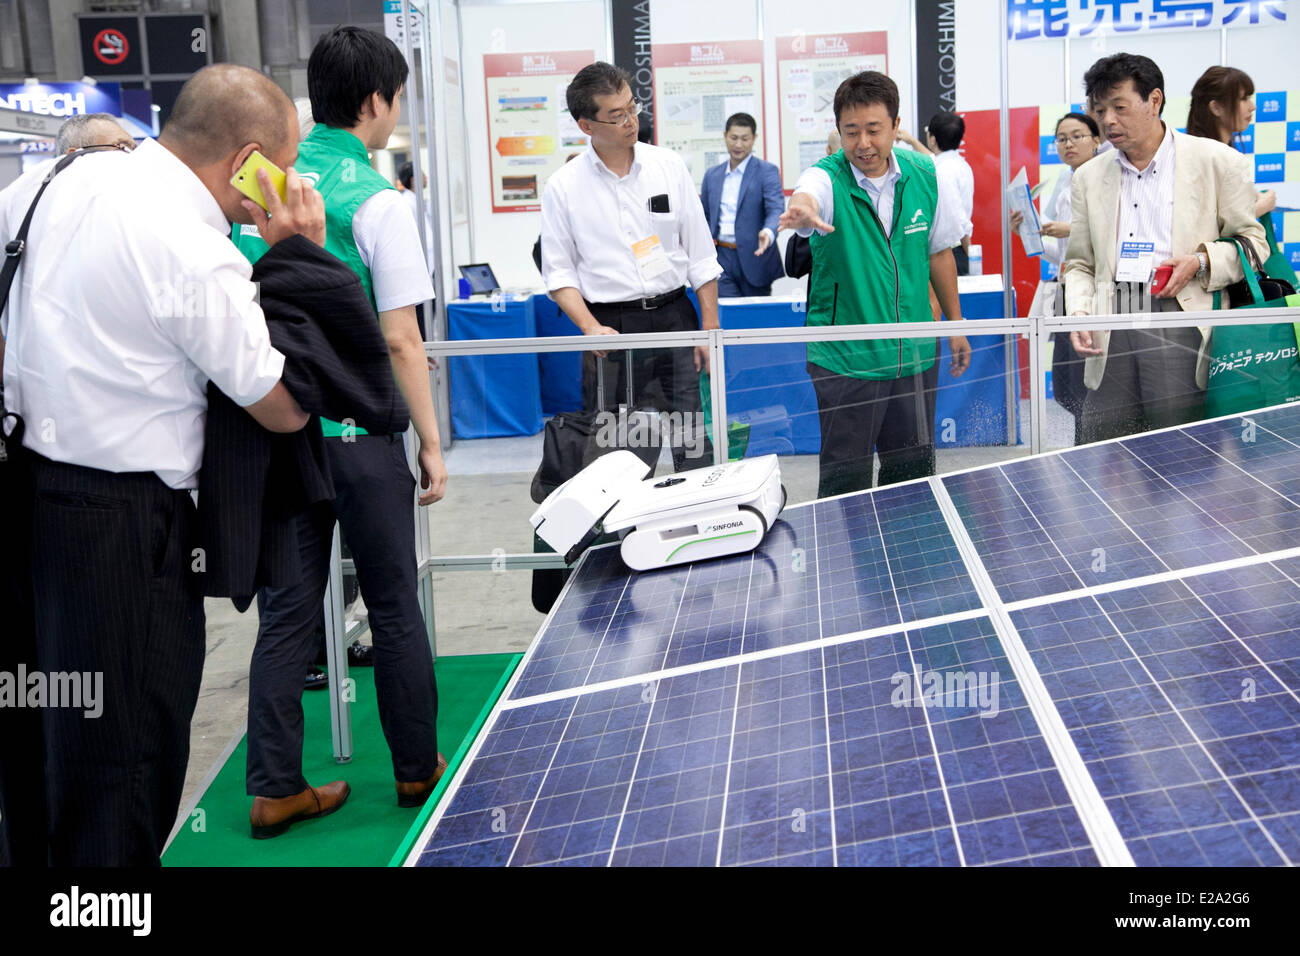 Tokyo, Japan. 18th June, 2014. – The solar panel cleaner 'RESOLA' performs at the Smart Community Japan 2014 in Tokyo Big Sight on June 18, 2014. The exhibition brings the latests products and technologies divided in 5 categories, 'Smart Community Exhibition', 'Biomass Expo', 'Next Generation Vehicle Exhibition, and newly-created 'Community Cloud 2014', which introduces technology for urban development. This year 229 enterprises and organizations shows their products from June 18th to 20th. Credit:  Aflo Co. Ltd./Alamy Live News Stock Photo